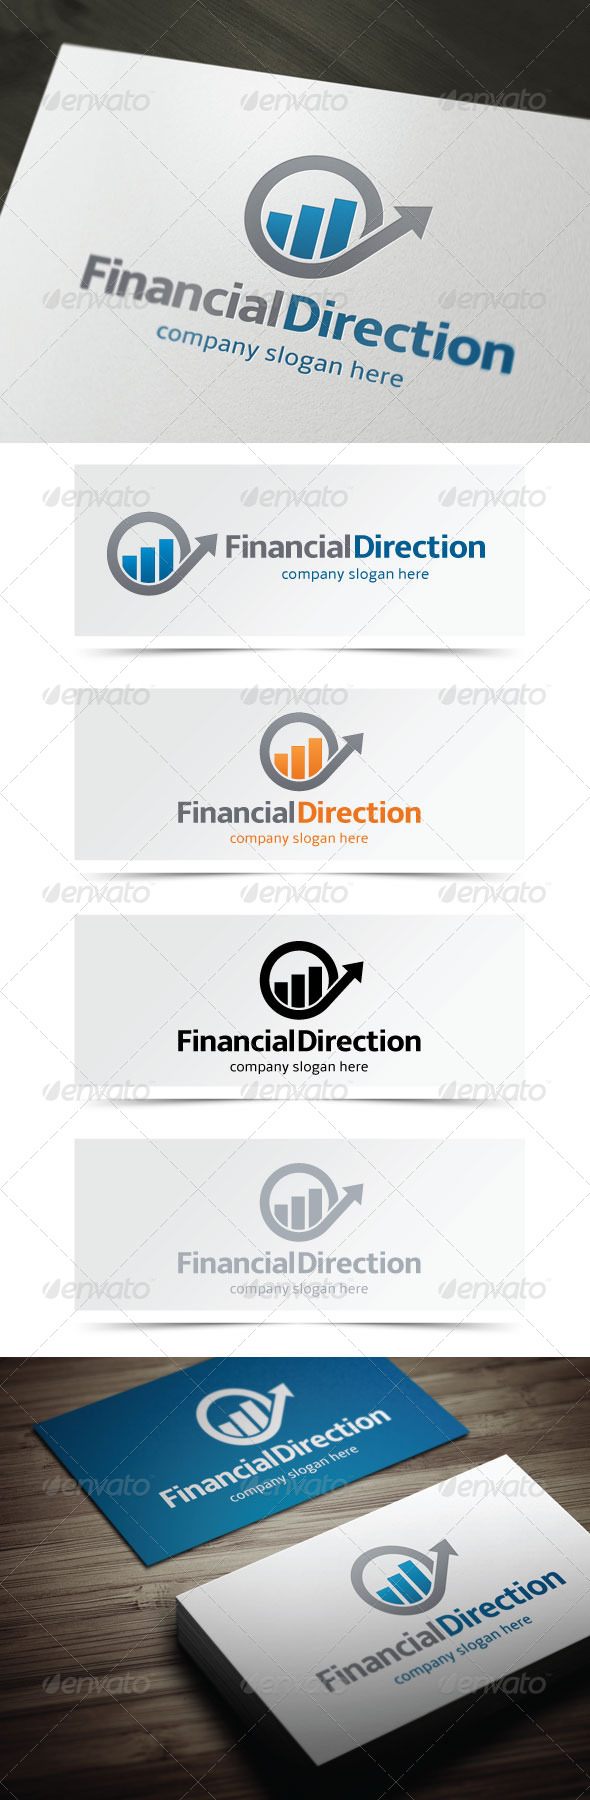 Financial Direction